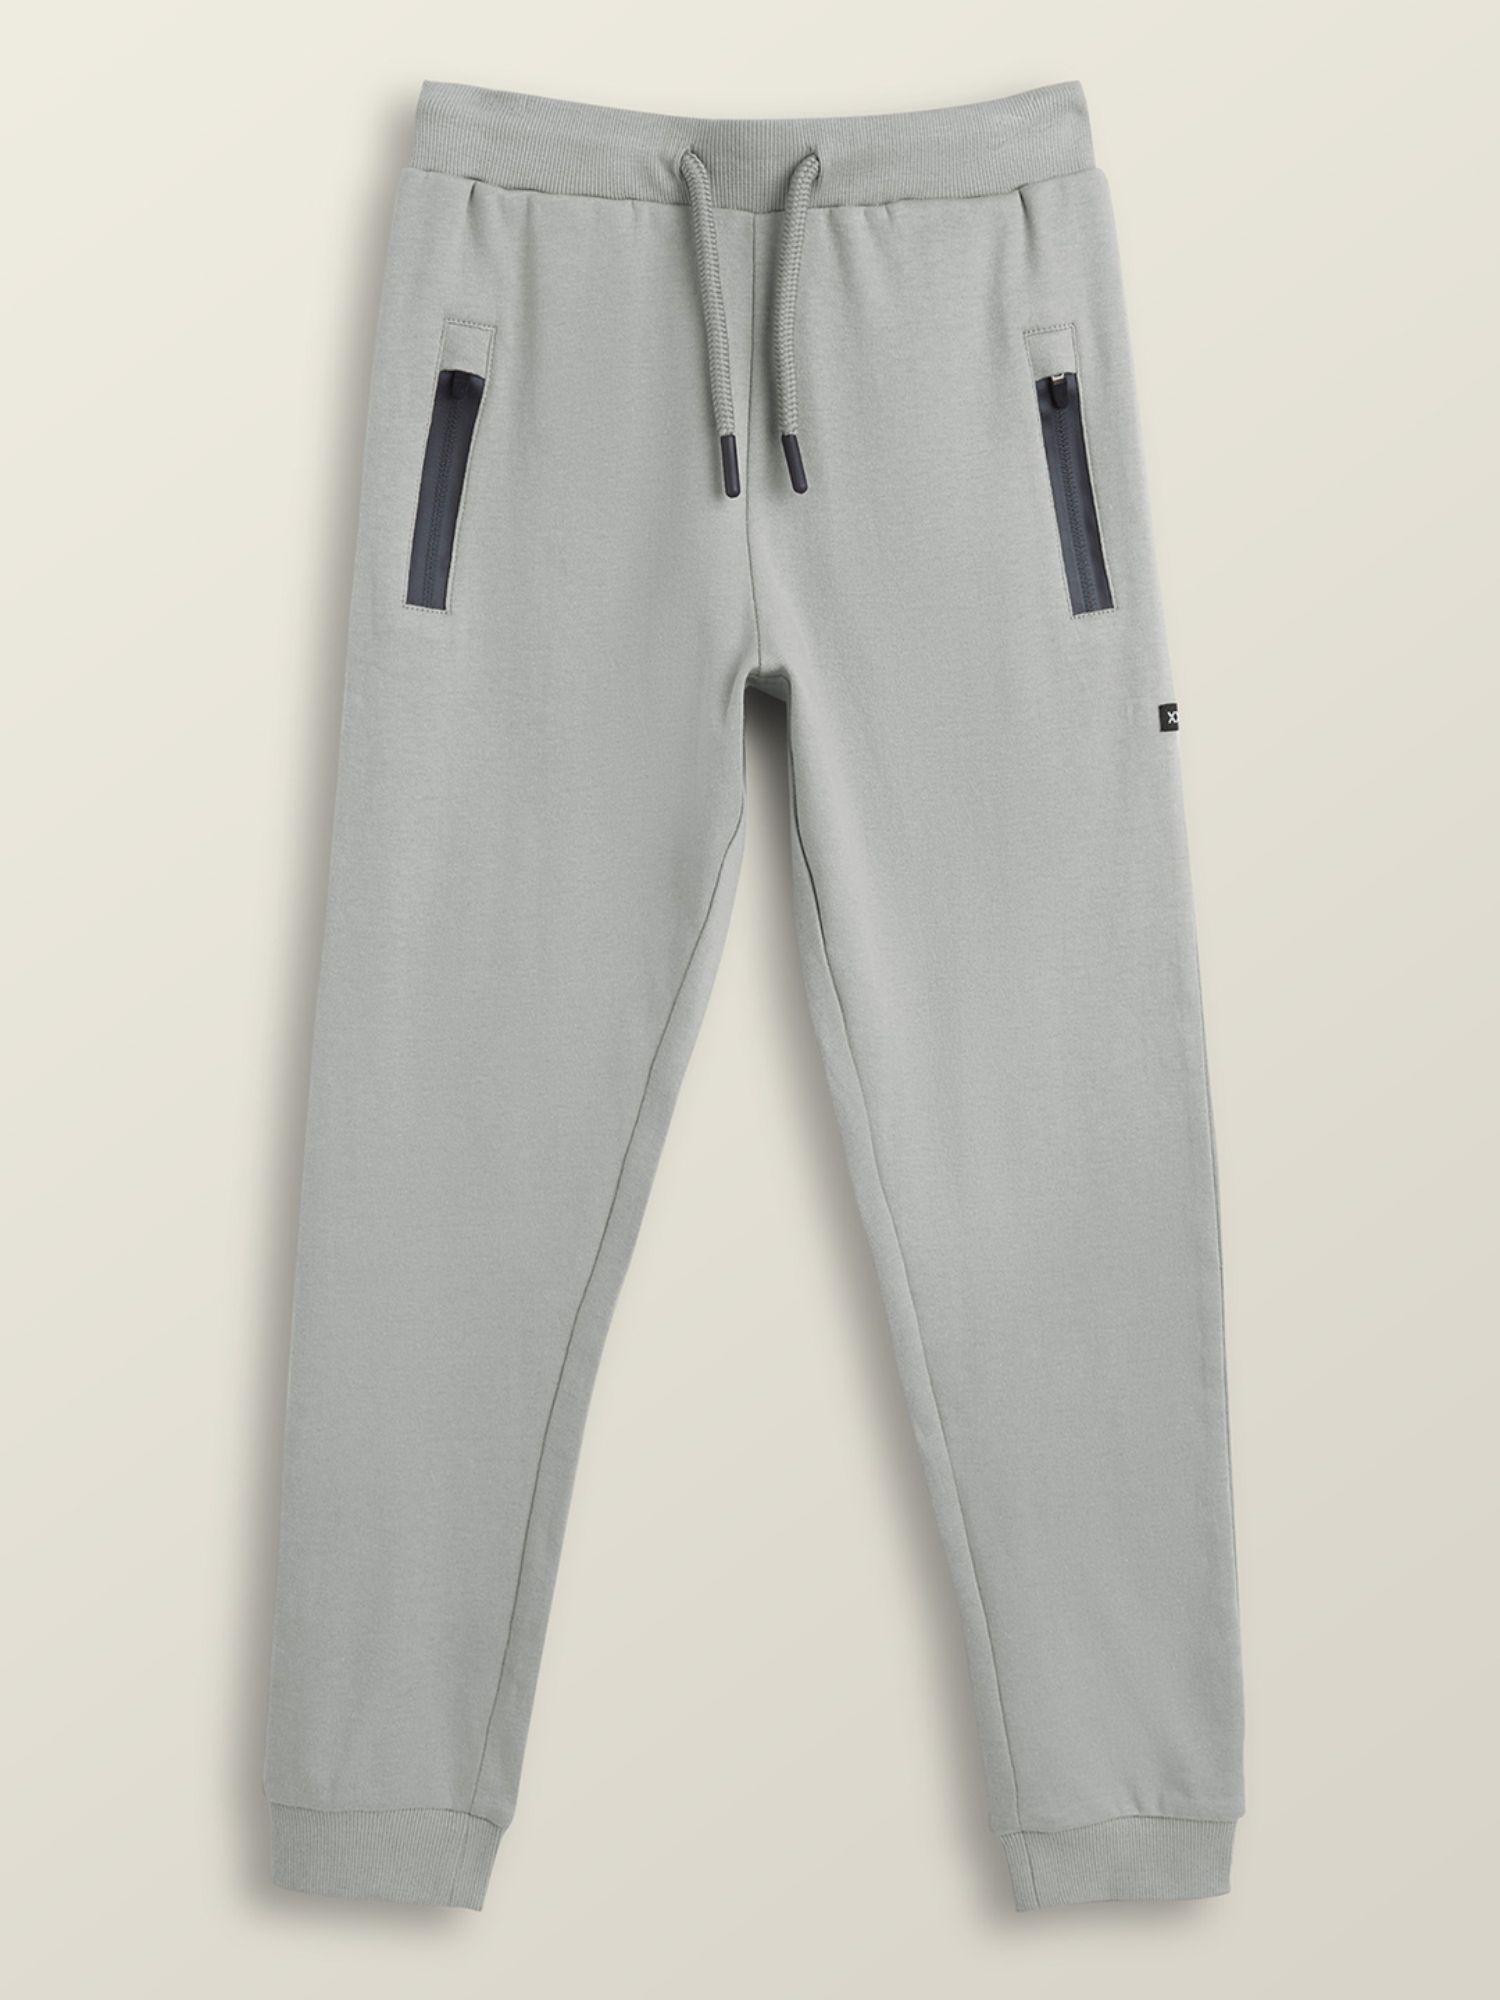 playmate cotton joggers for boys-grey